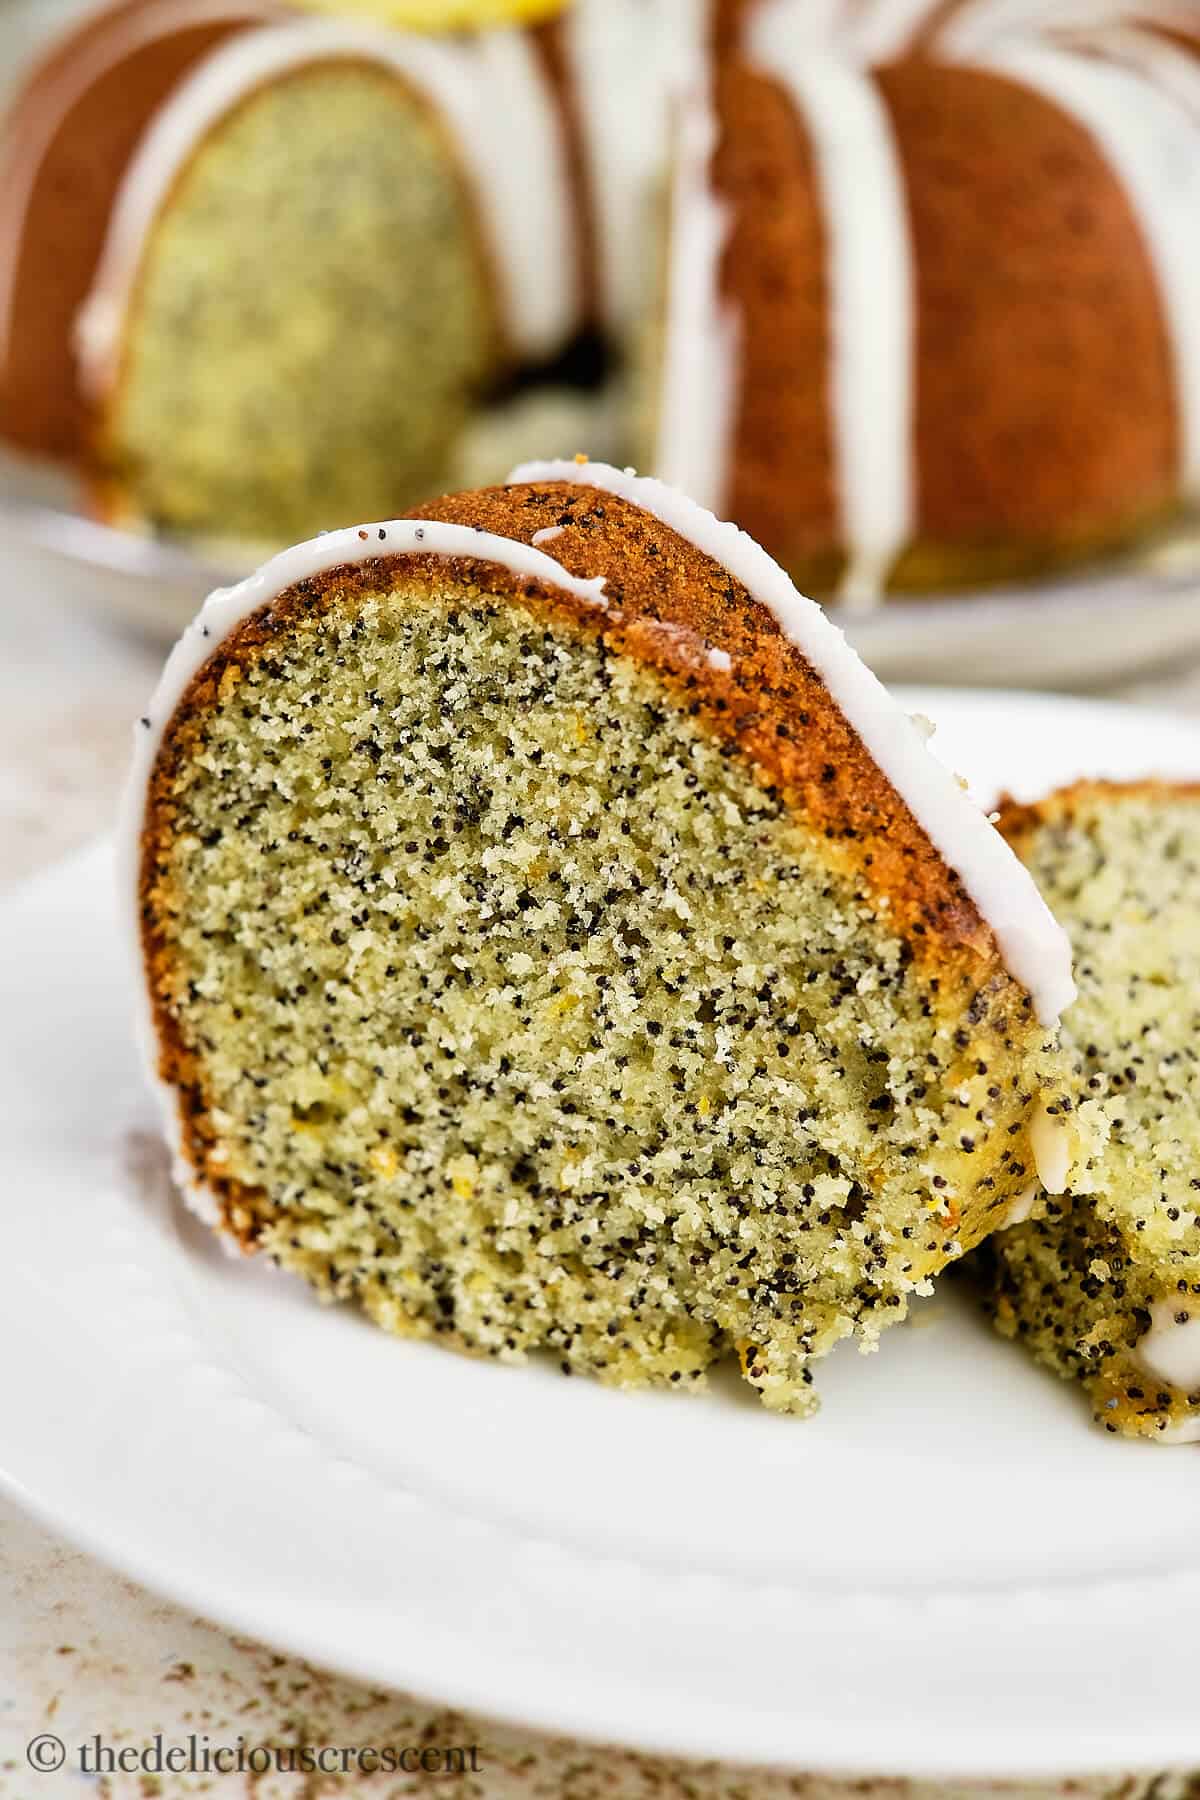 A wedge of citrus cake with poppy seeds.